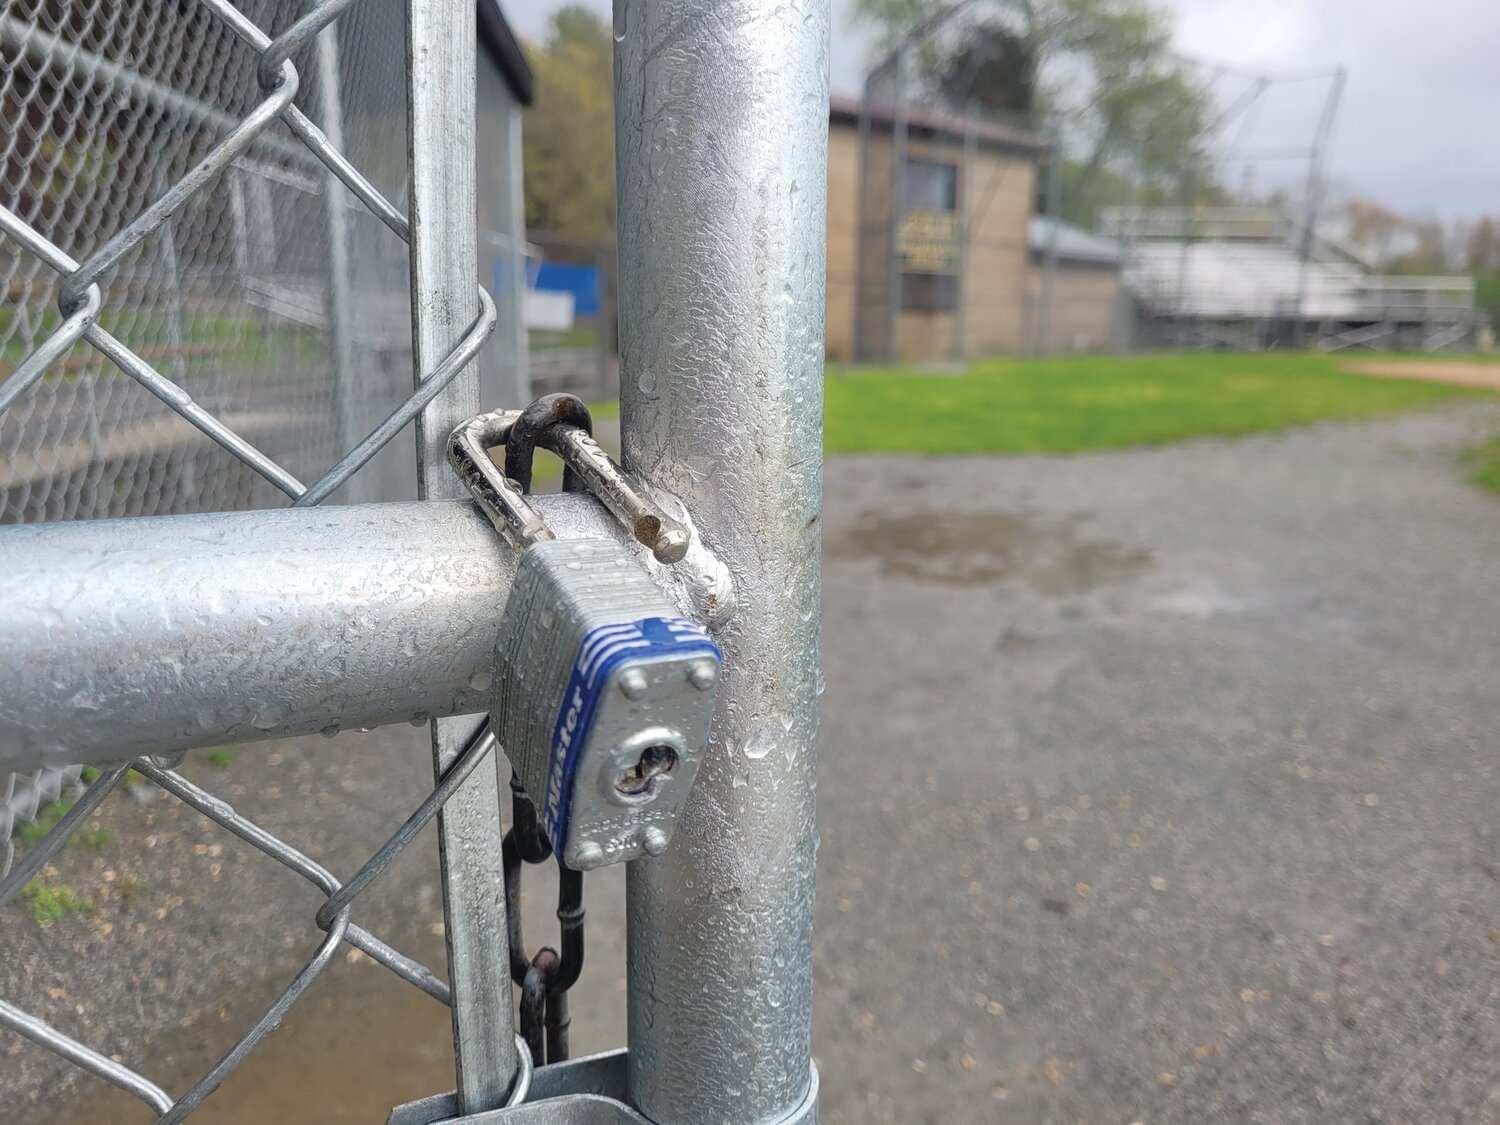 OPEN FOR PLAY? Johnston has been locking most of the town’s ballfields. One town councilman would like to see that policy change. The town’s director of buildings and grounds, however, says the locks keep out pooping dogs and their irresponsible owners.